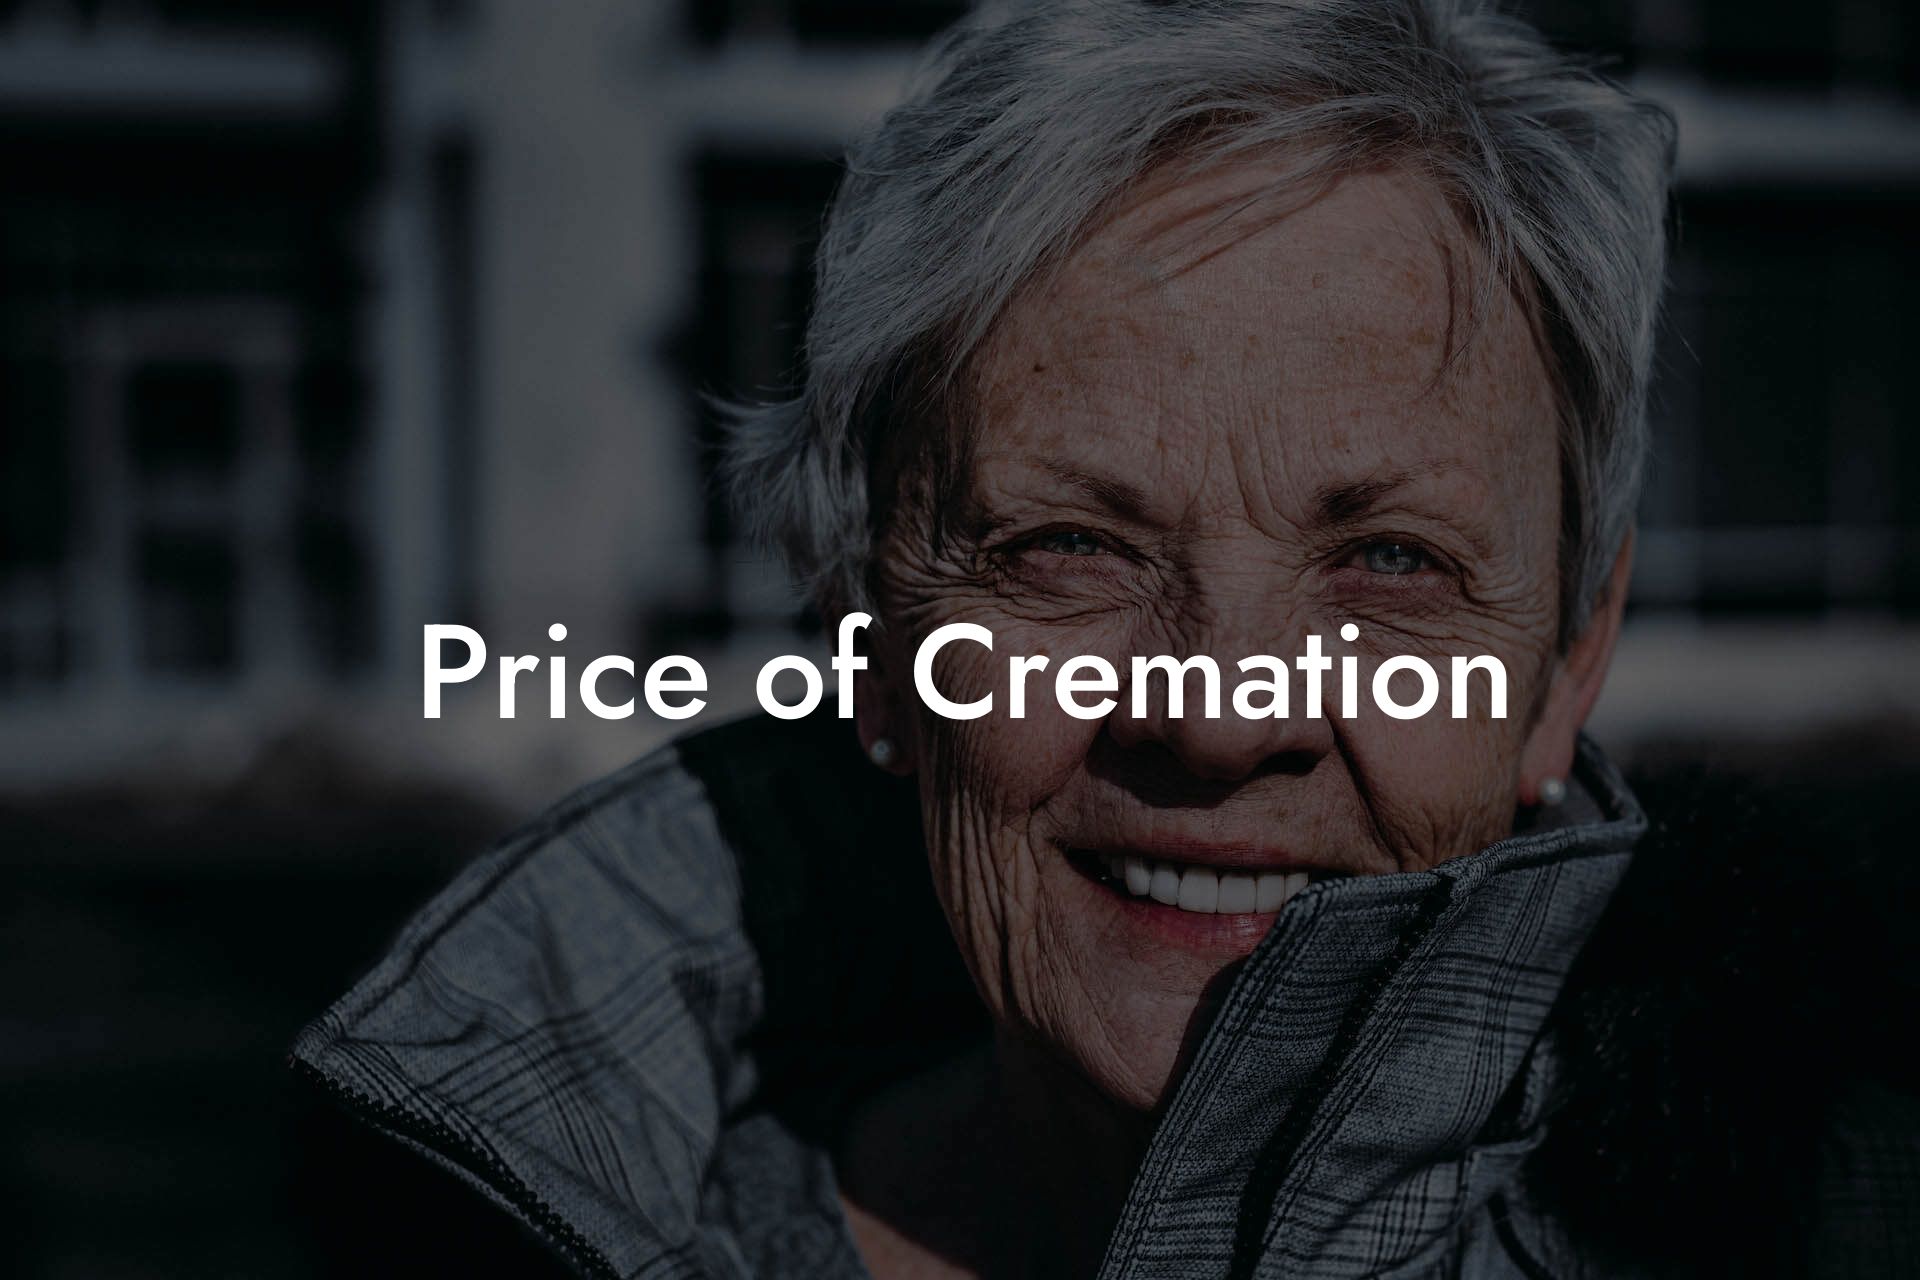 Price of Cremation